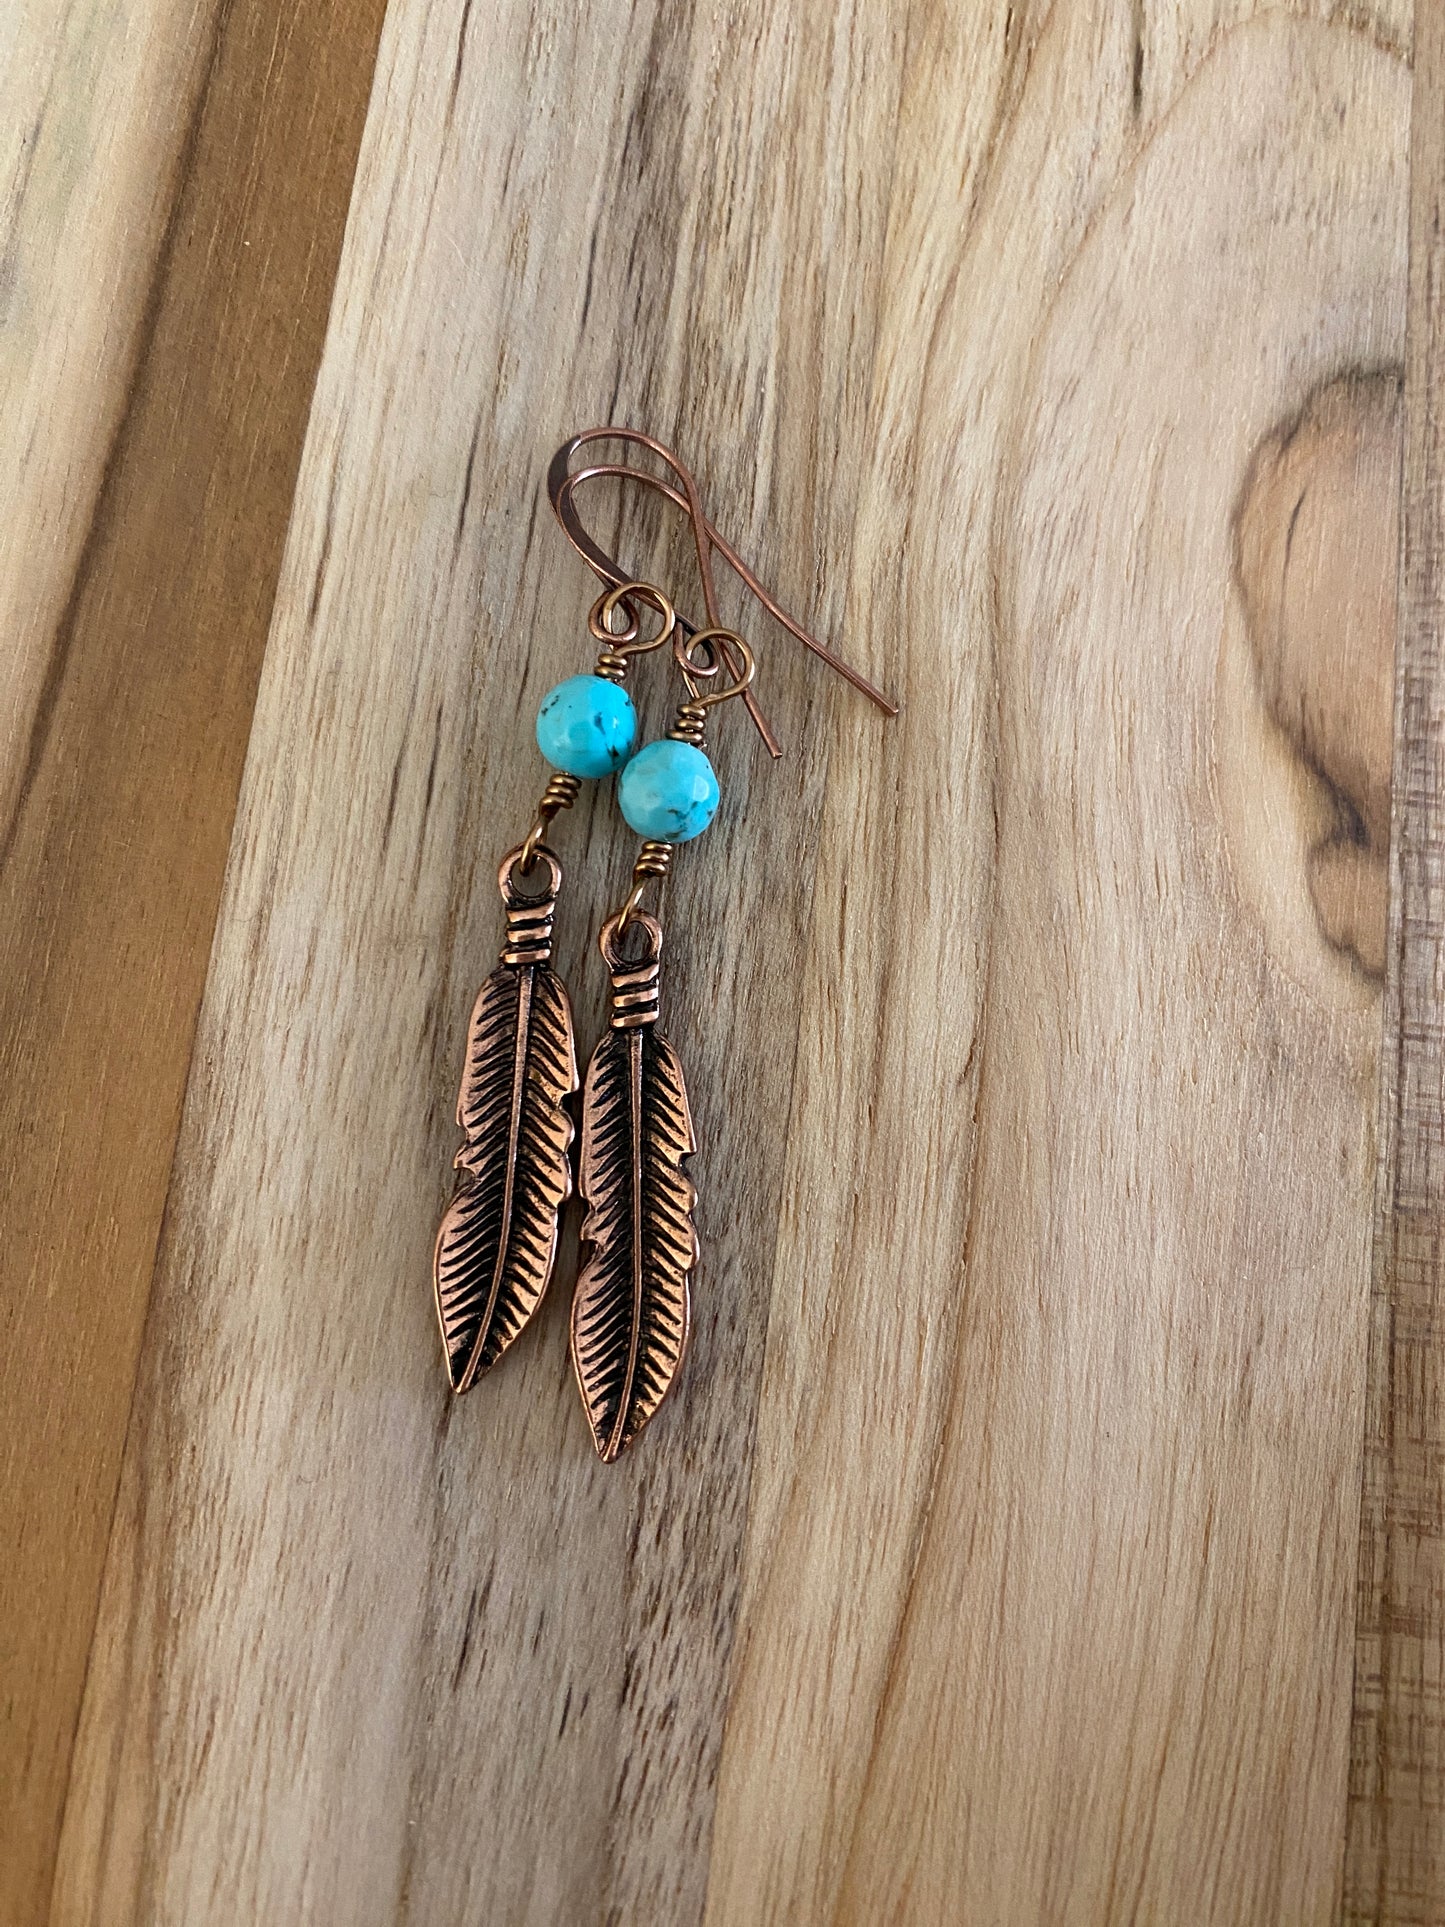 Antique Copper Feather Dangle Earrings with Faceted Turquoise Bead